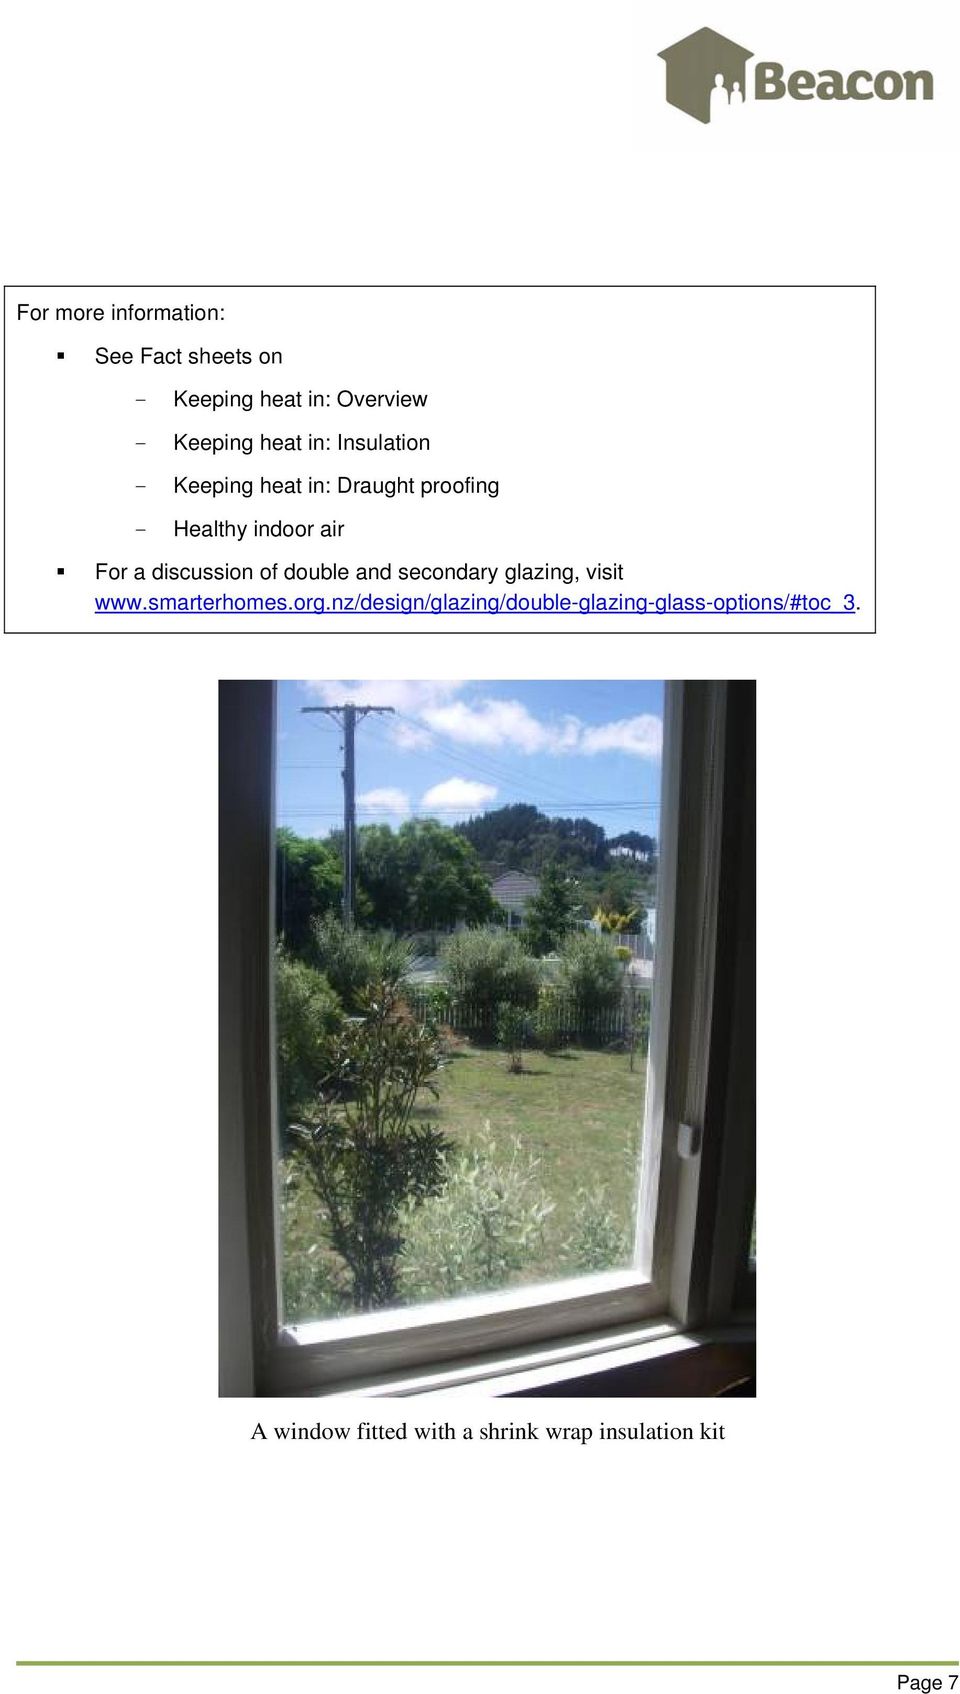 discussion of double and secondary glazing, visit www.smarterhomes.org.